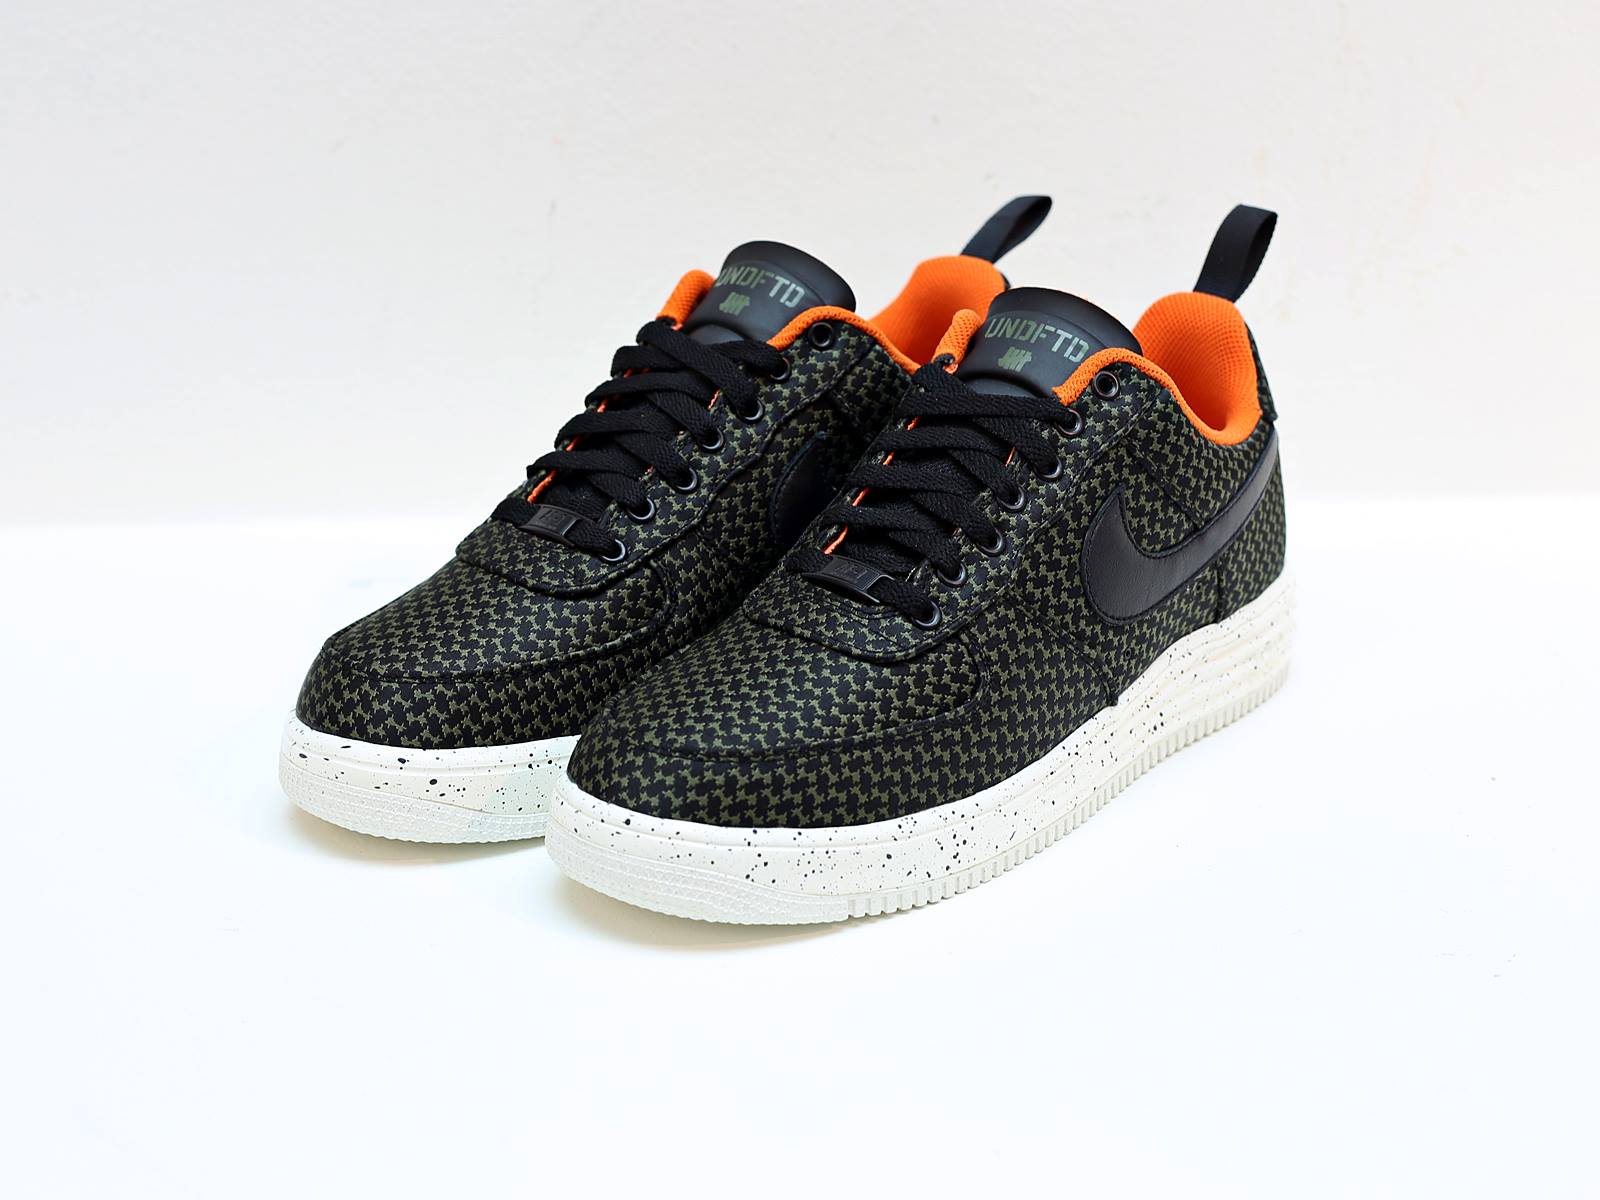 652805-003 $220 Nike x UNDEFEATED LUNAR AIR FORCE 1 LOW UNDFTD SUPREME